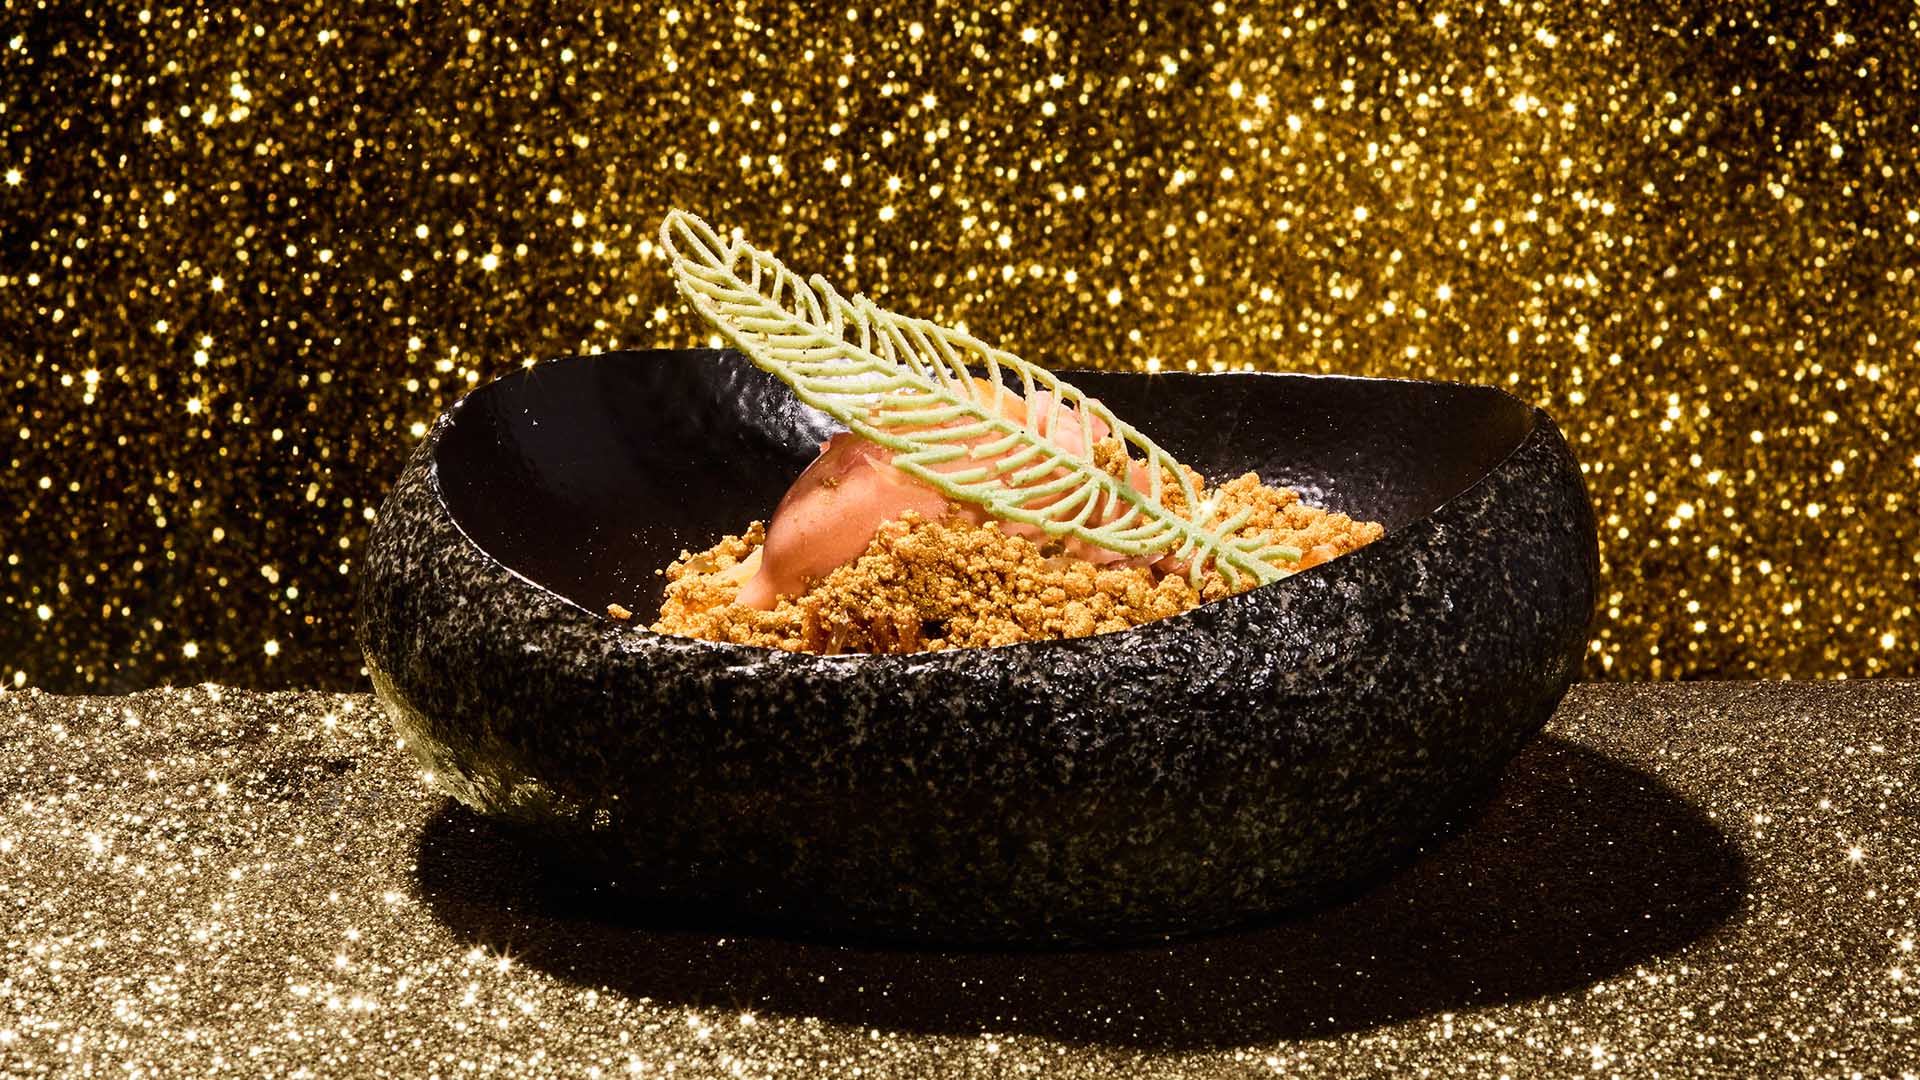 Degustations Don't Get Much More Magical Than NEL's Returning 11-Course Disney-Themed Feast